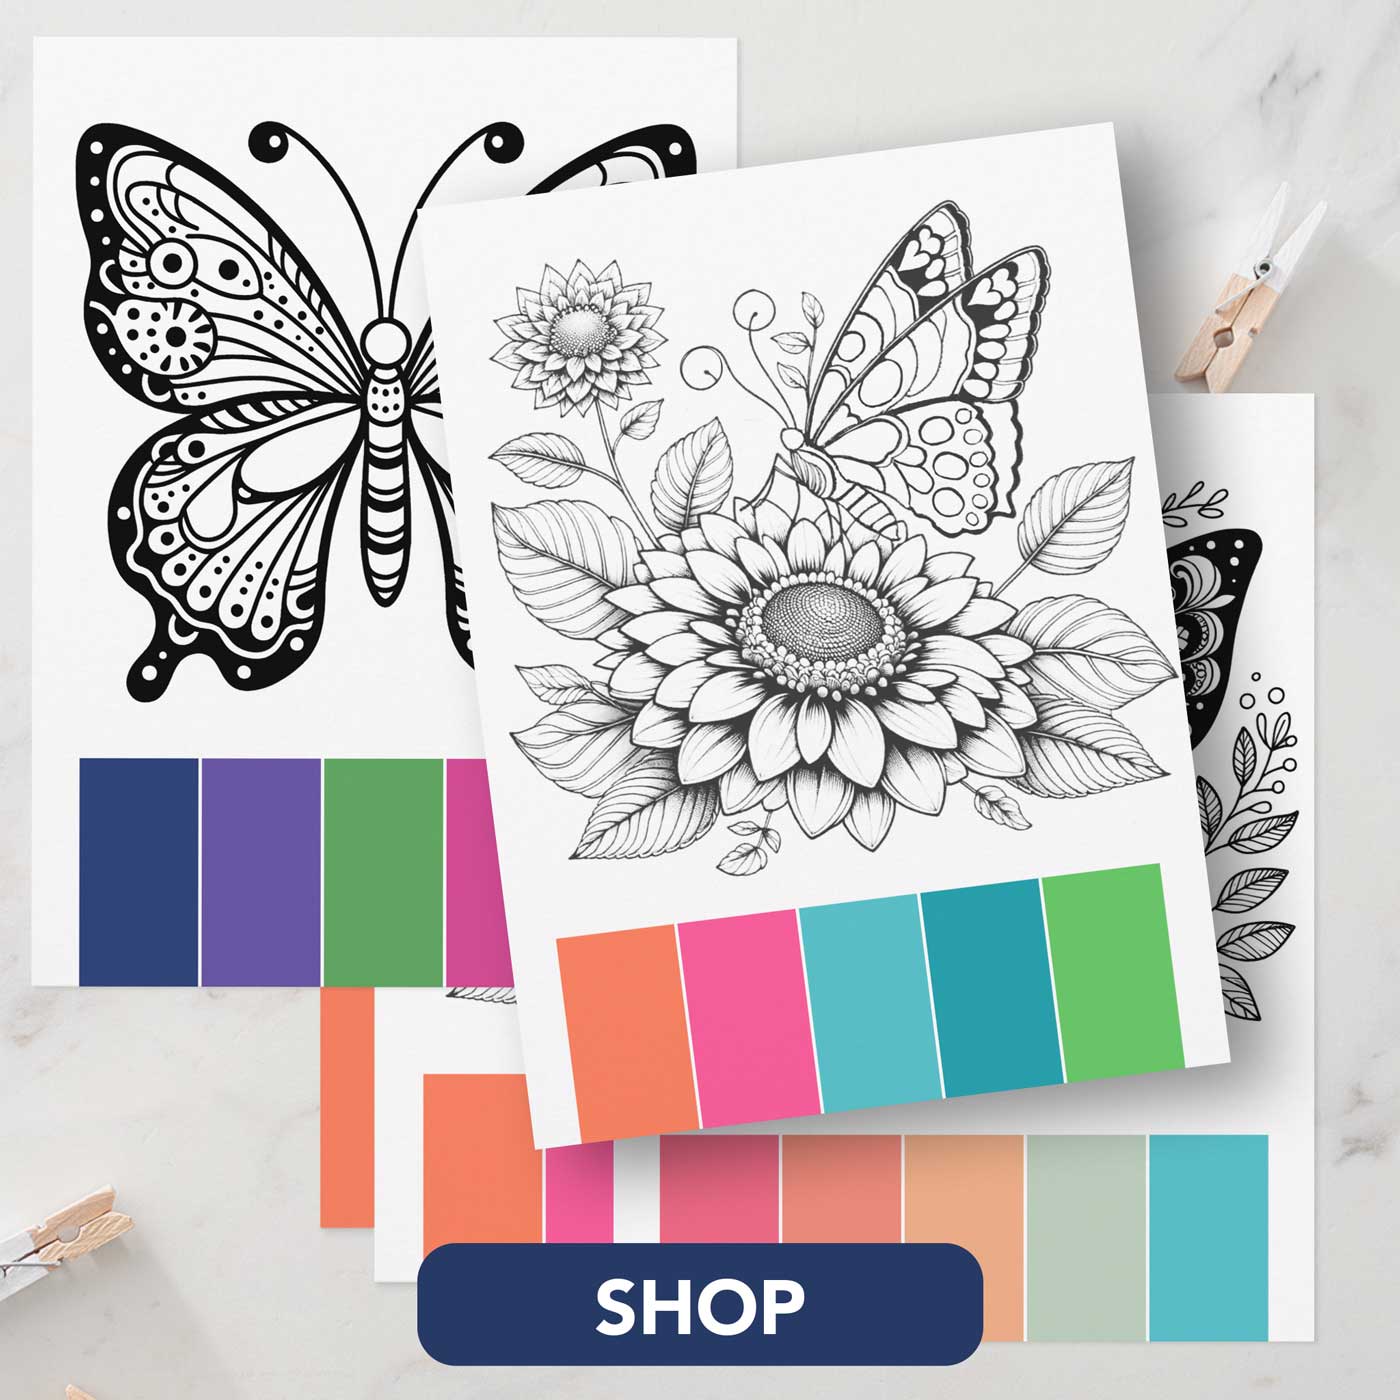 Butterfly coloring pages for adults with color schemes. Click to shop.